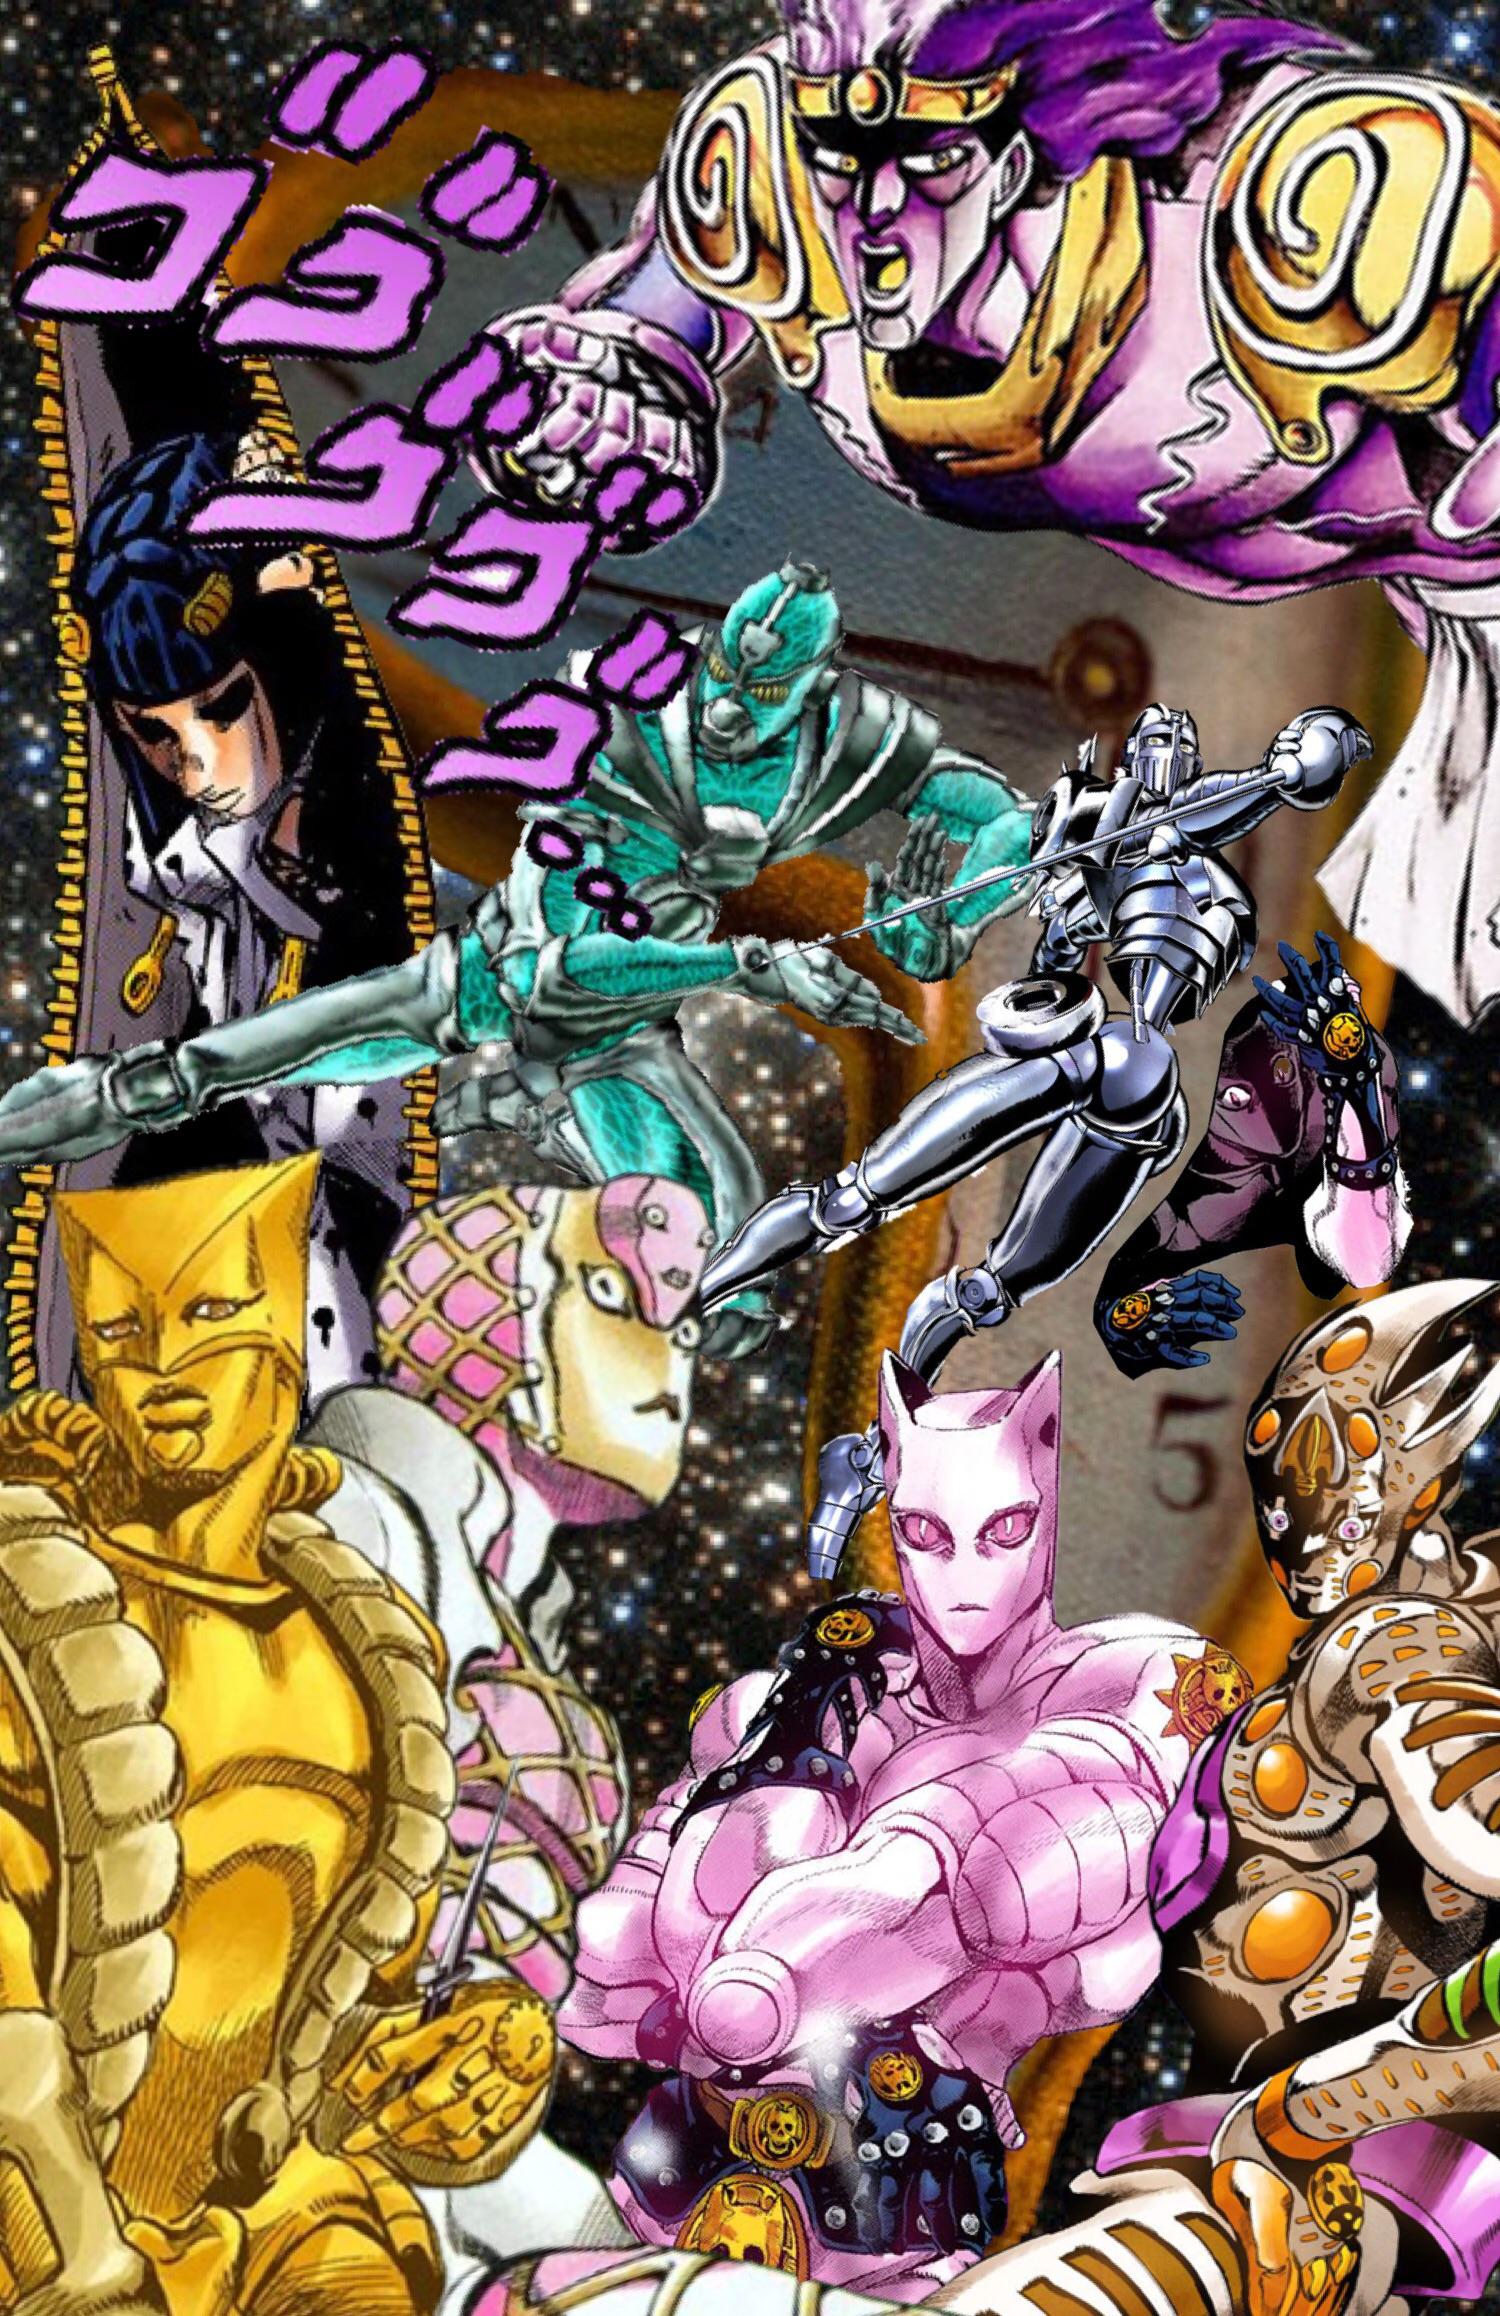 after watching part 5 I got inspired to edit this phone wallpaper